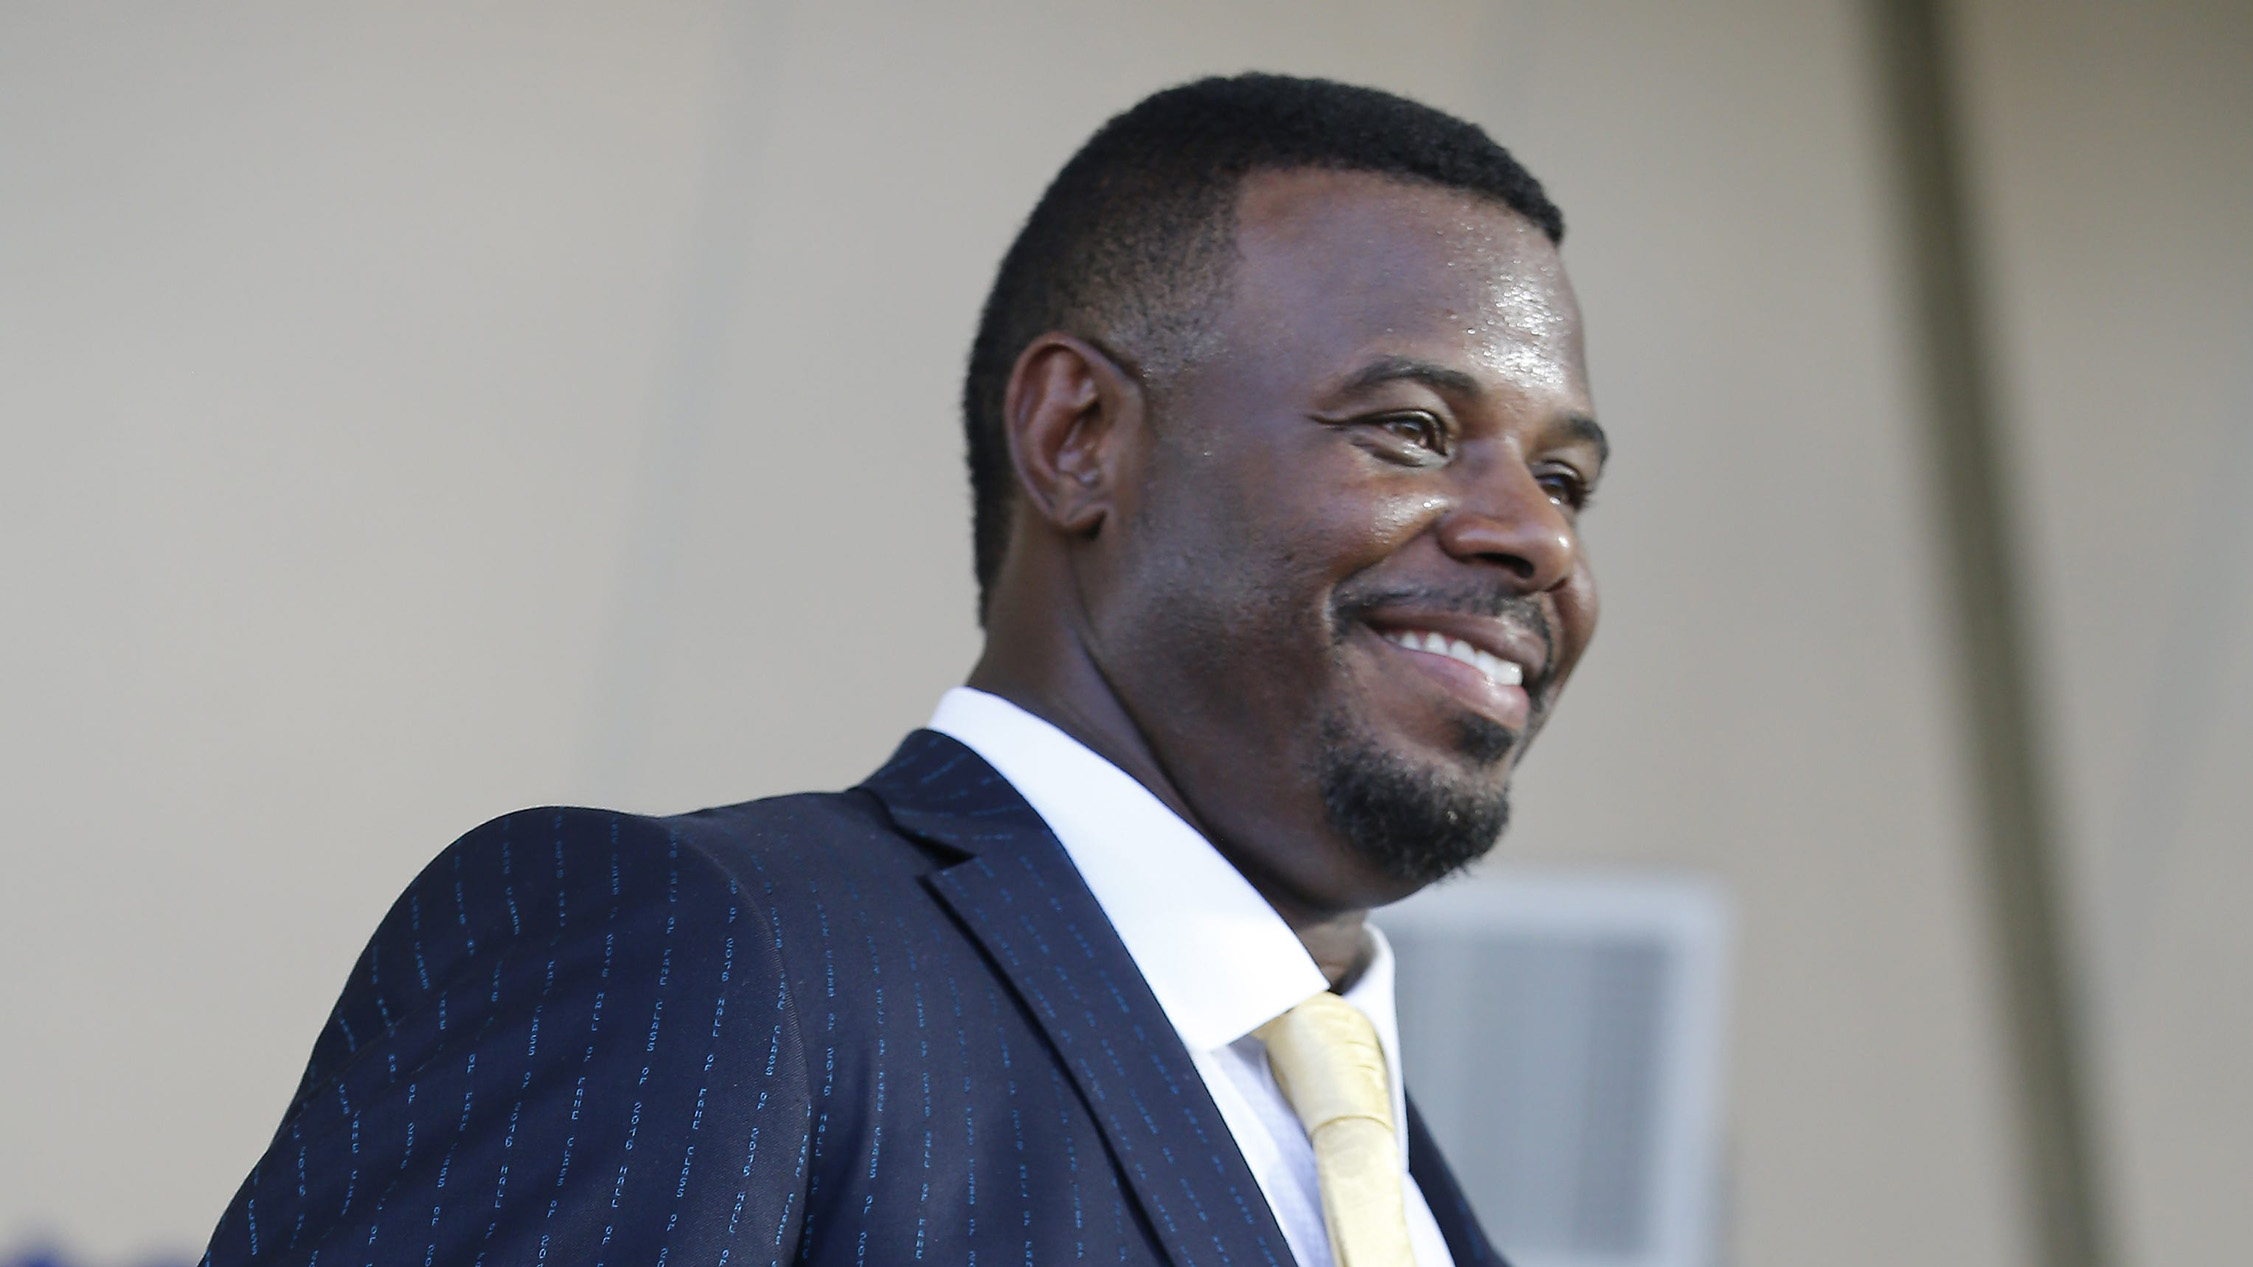 Ken Griffey Jr., Who Retired in 2010, Still Being Paid by Reds